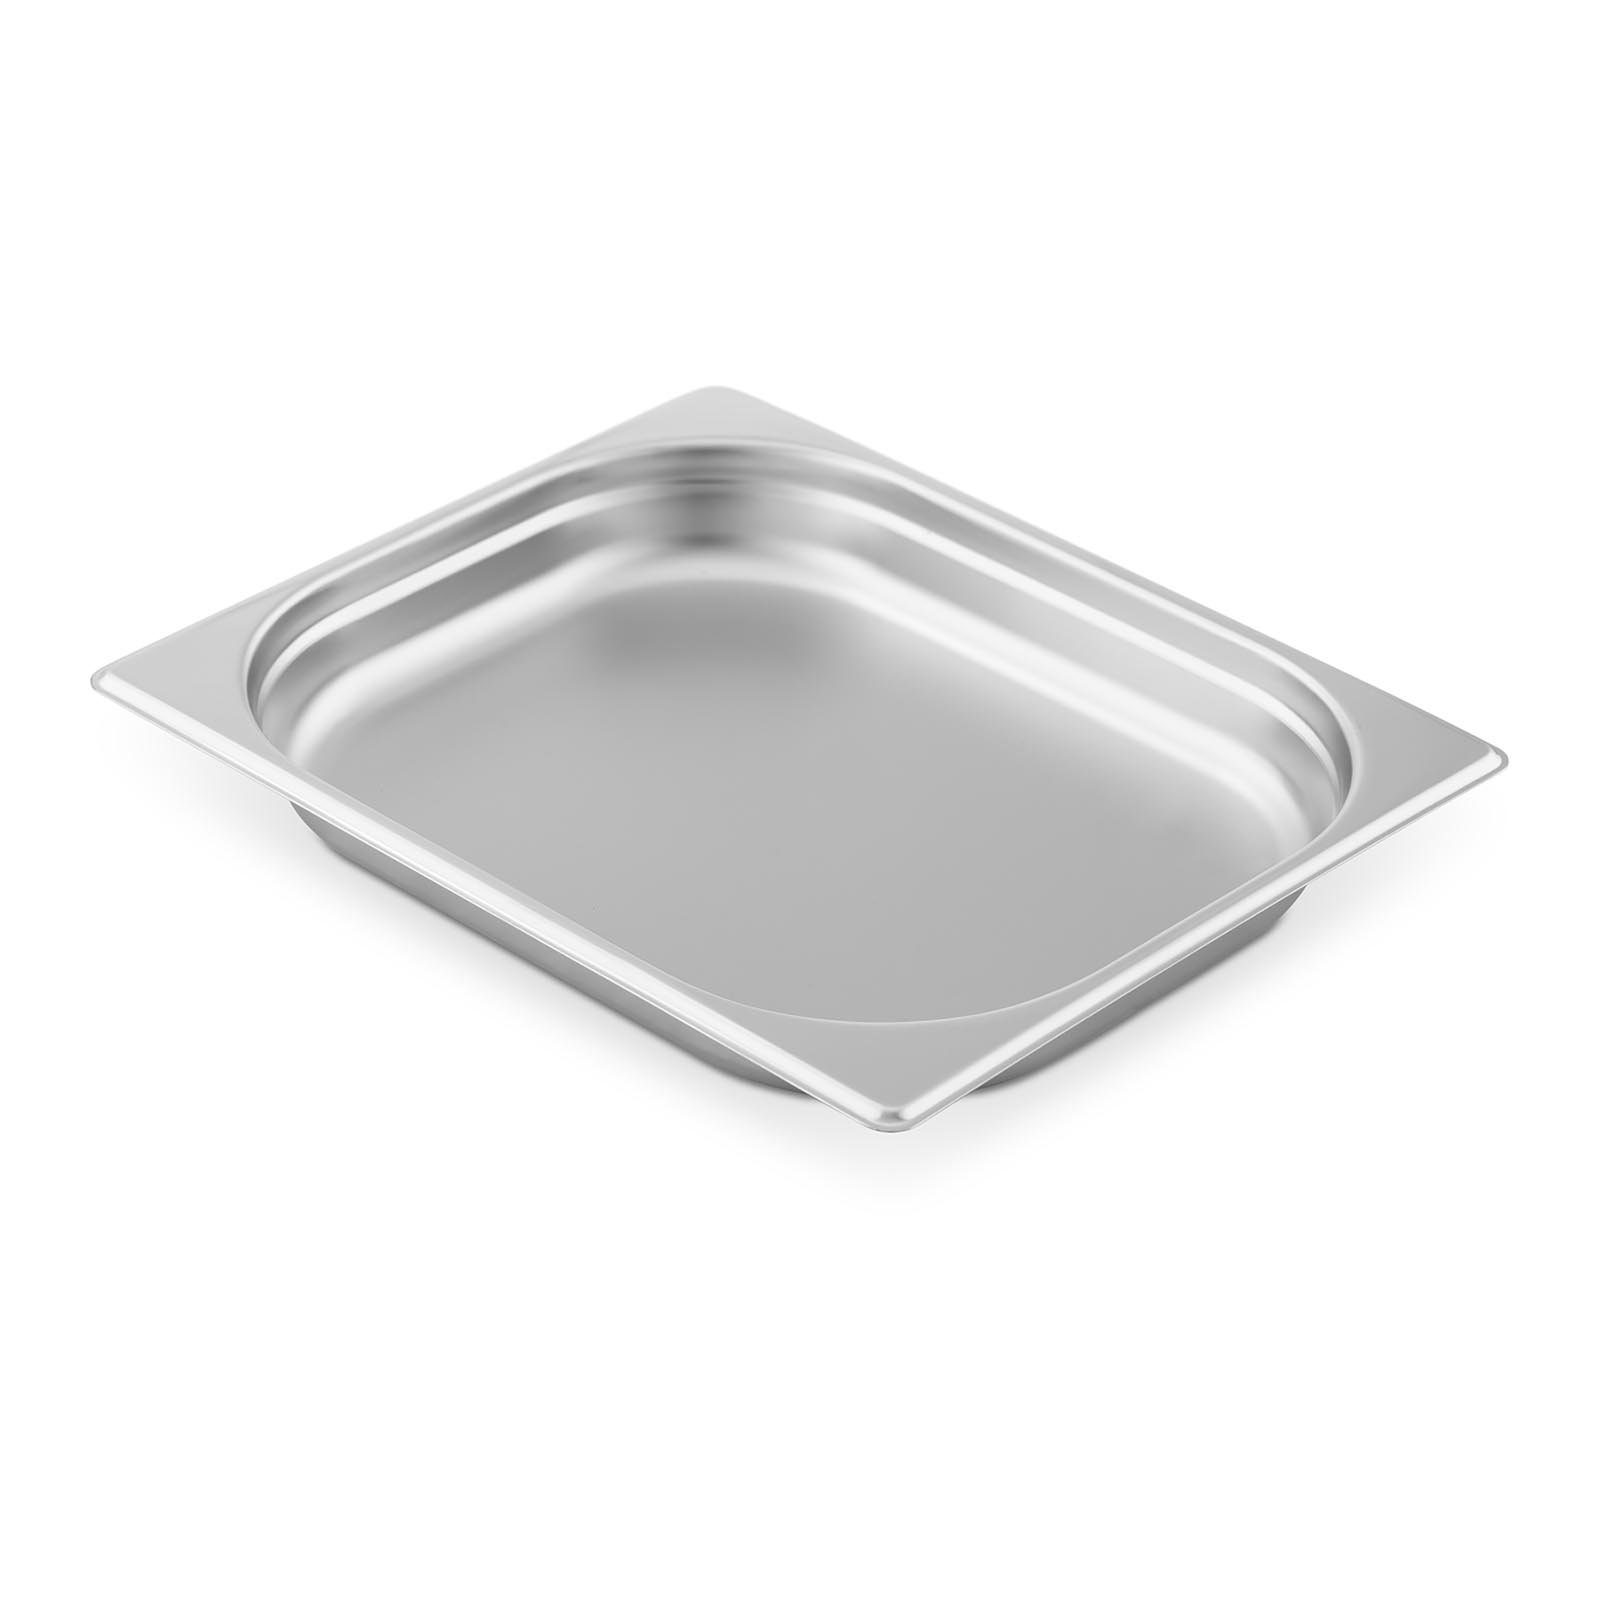 Royal Catering Thermobehälter GN Behälter 1/2 Gastronorm 40mm tief spülmaschinenfest Bain Marie